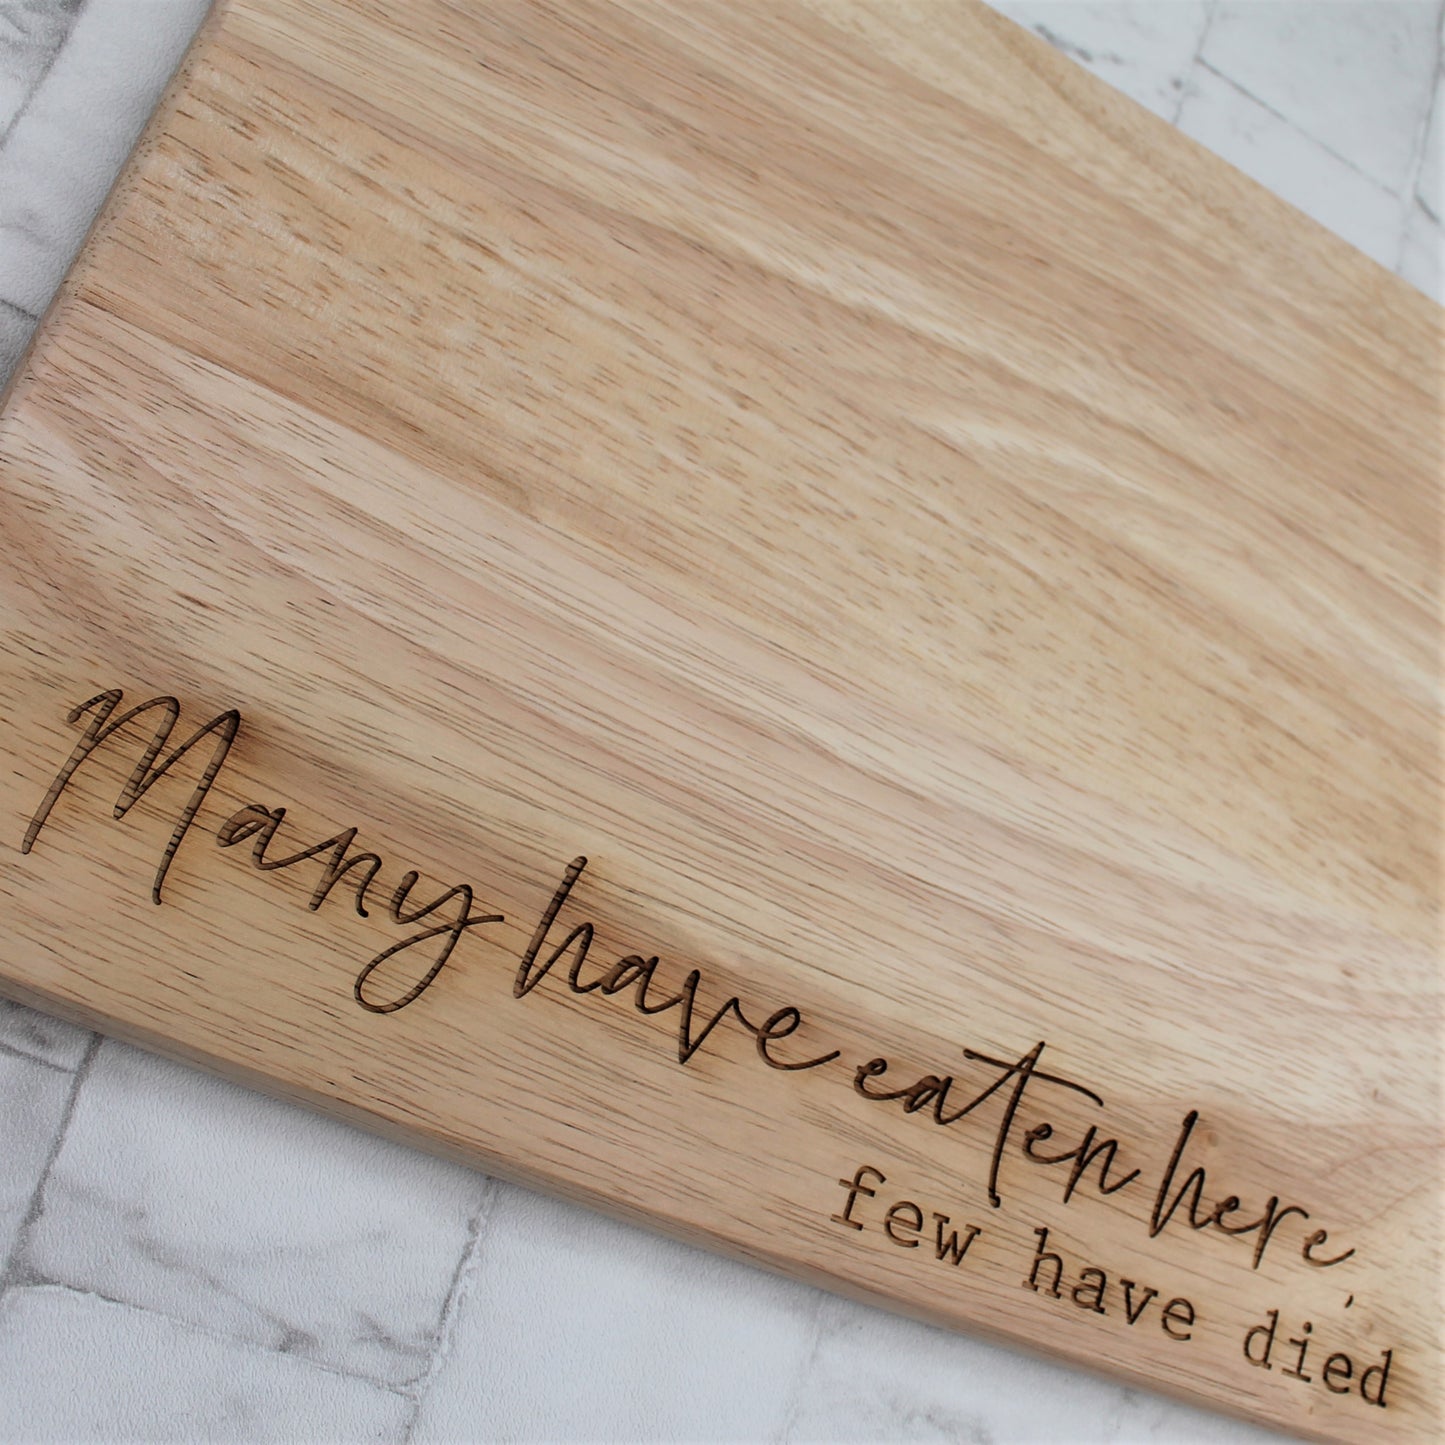 Many Have Eaten Here, Few Have Died - Wooden Chopping Board